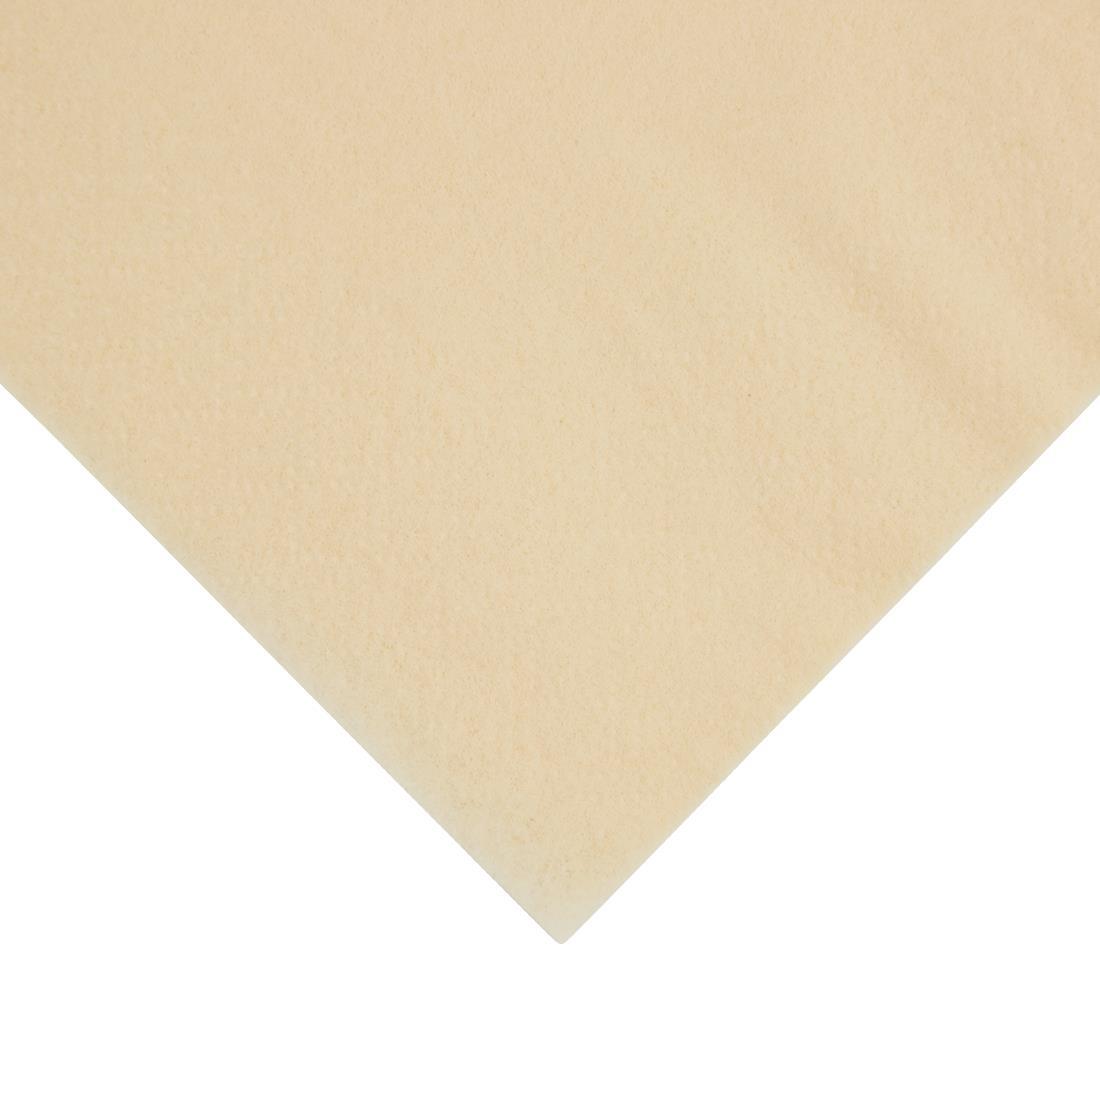 Fiesta Recyclable Lunch Napkin Cream 33x33cm 2ply 1/4 Fold (Pack of 2000) - FE220  - 2